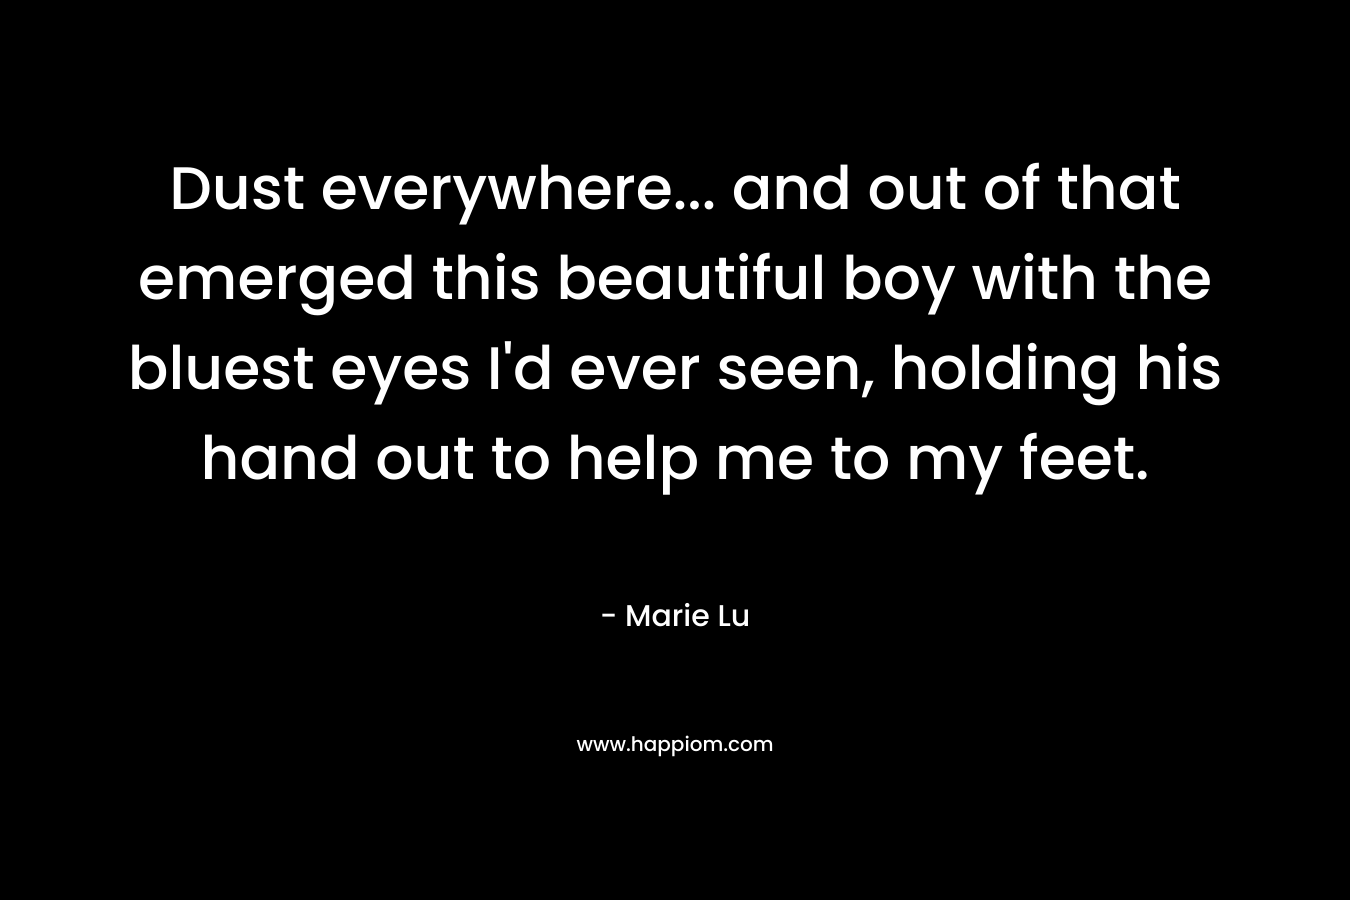 Dust everywhere… and out of that emerged this beautiful boy with the bluest eyes I’d ever seen, holding his hand out to help me to my feet. – Marie Lu